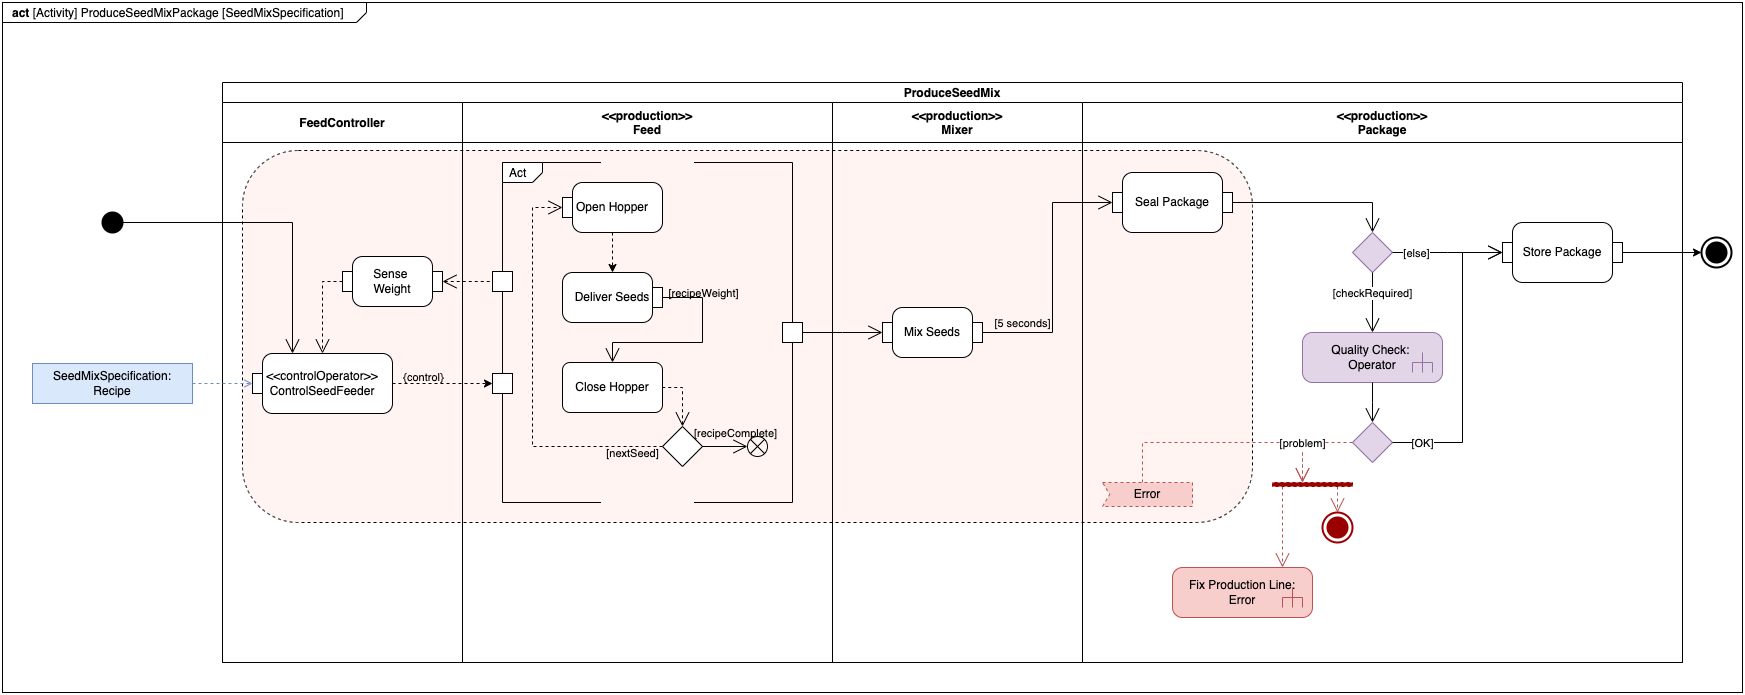 Activity diagrams are used to model workflows in various ways